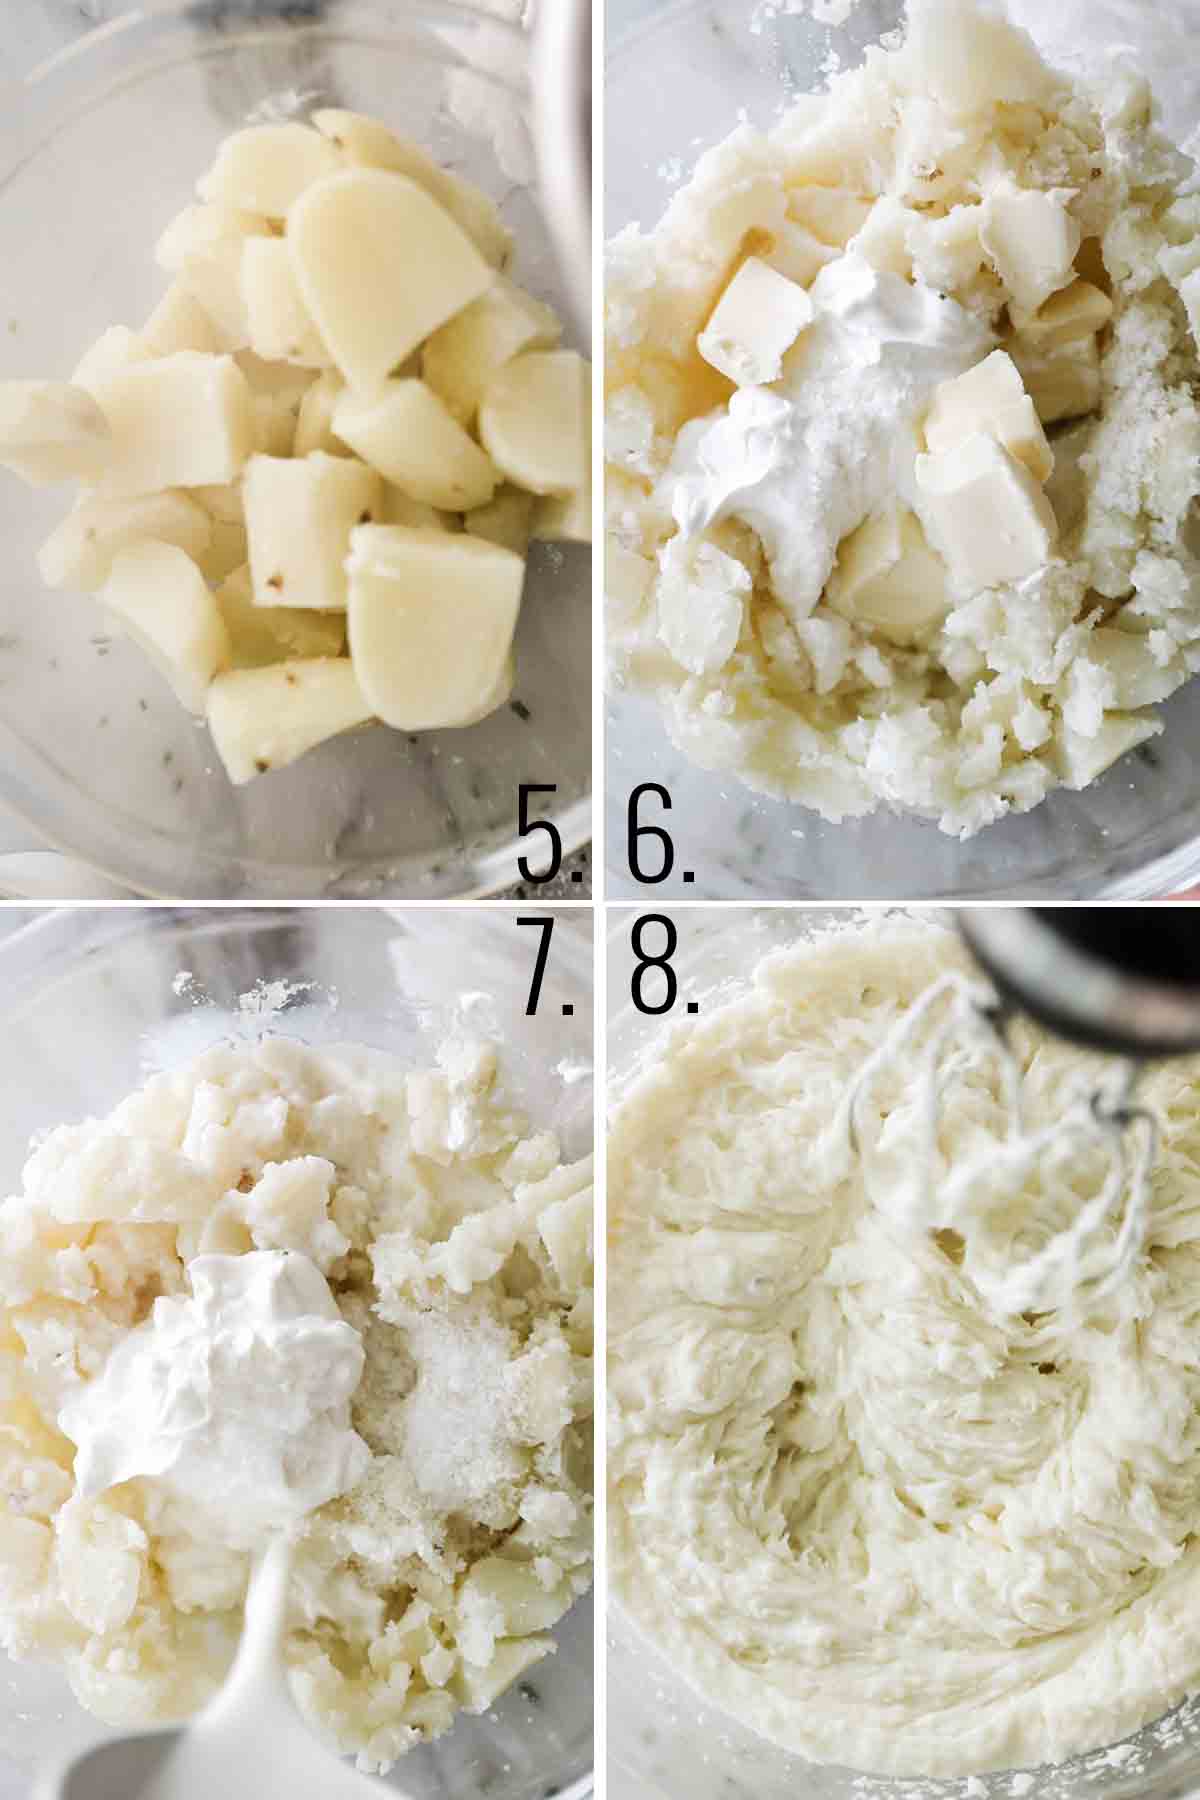 Four photos showing ingredients added to pressure cooked potatoes in a glass bowl.